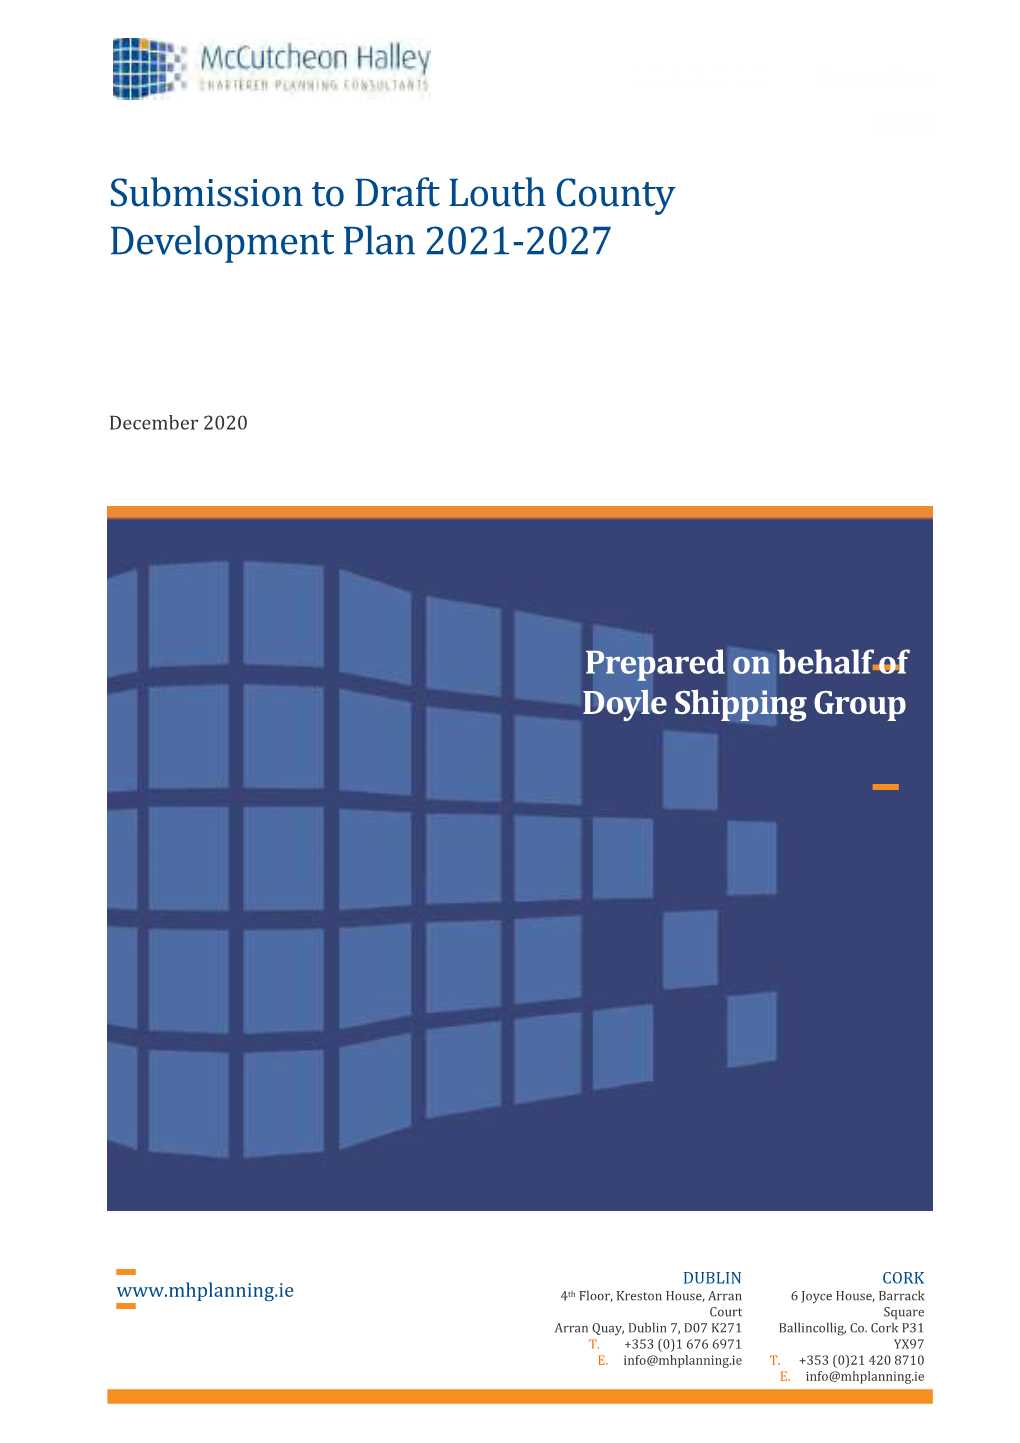 Submission to Draft Louth County Development Plan 2021-2027